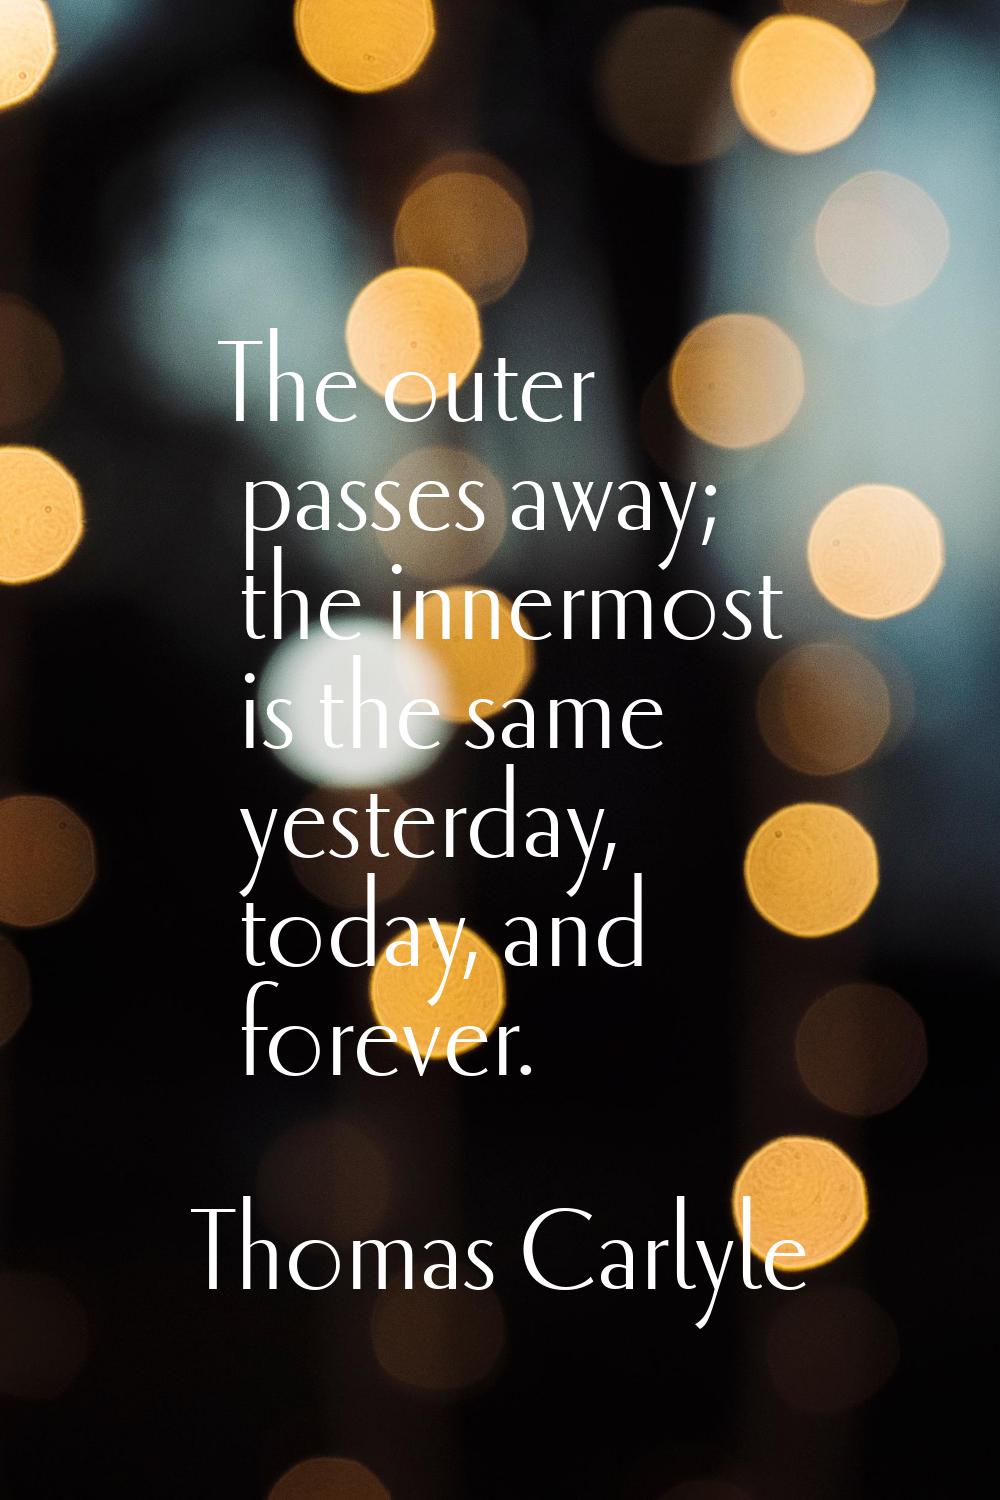 The outer passes away; the innermost is the same yesterday, today, and forever.